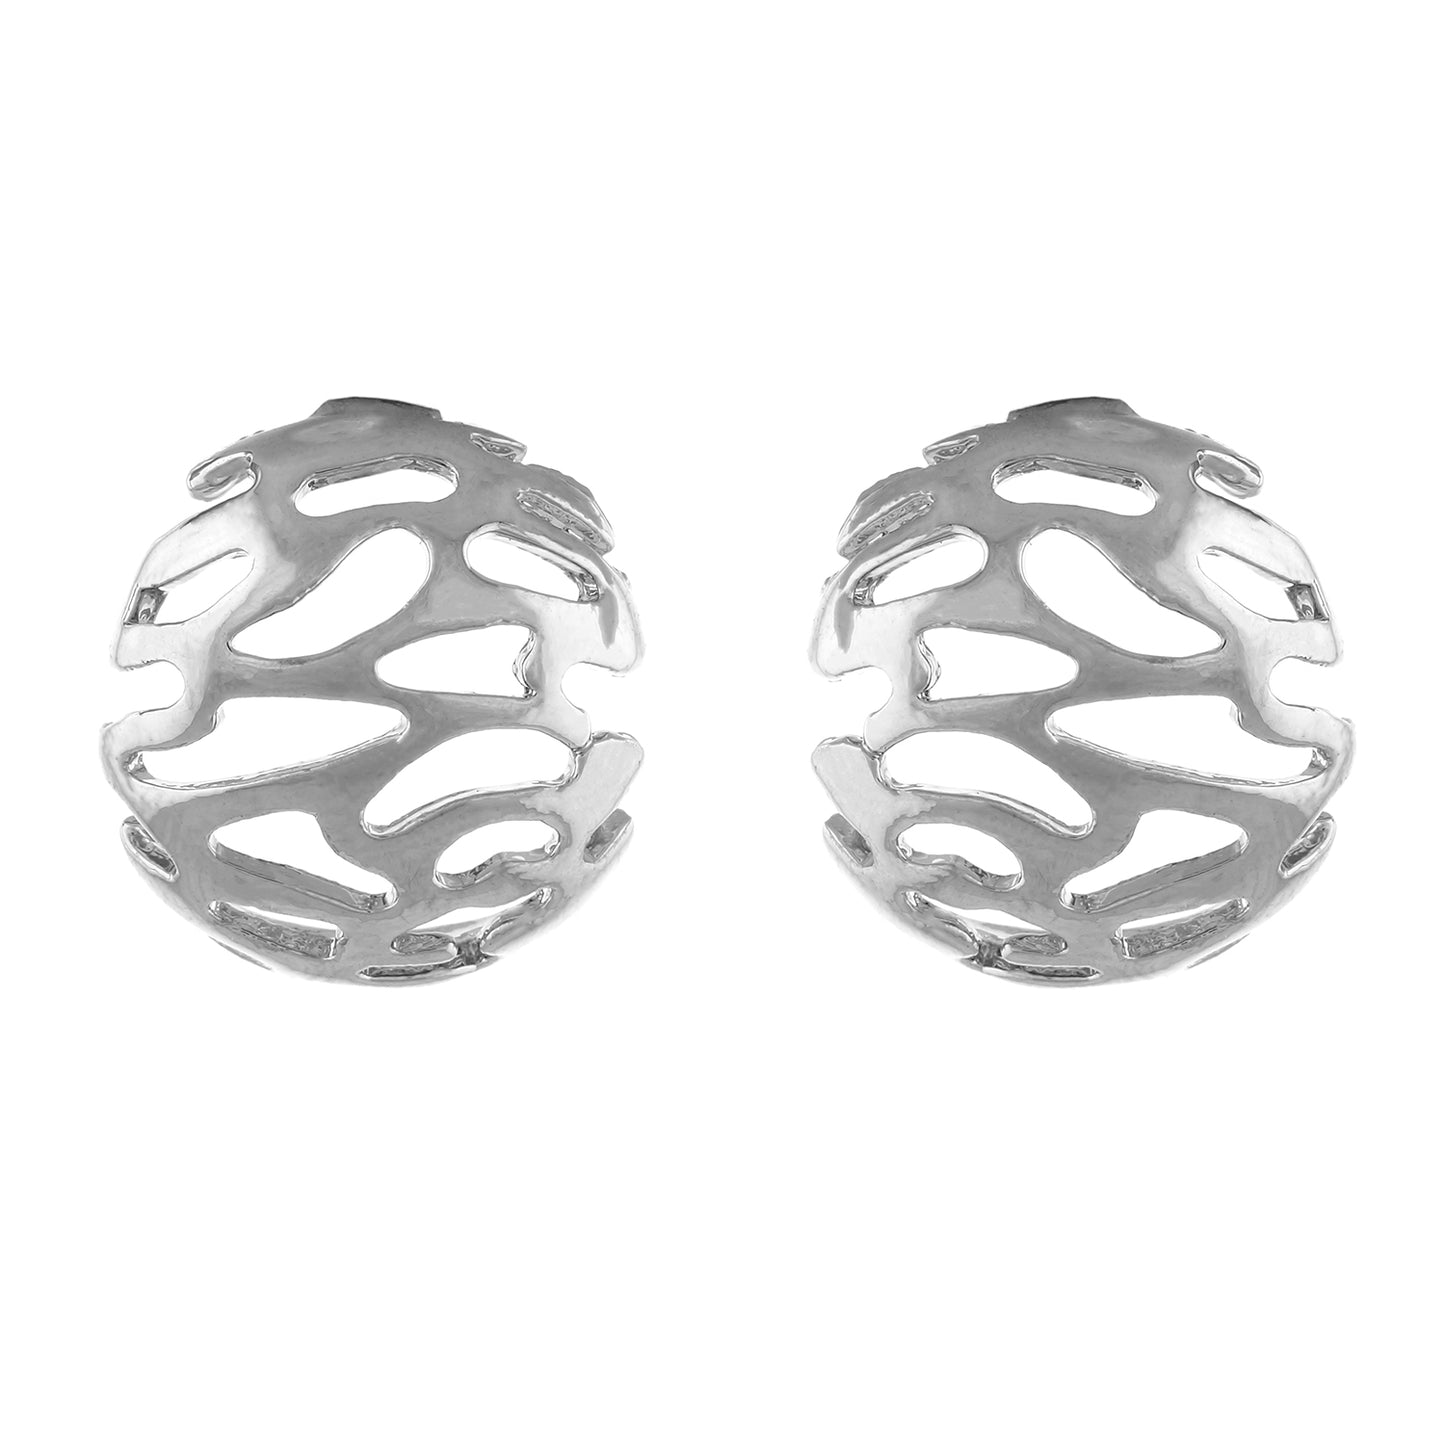 Silver colour Round Design  Stud Earrings for Girls and Women